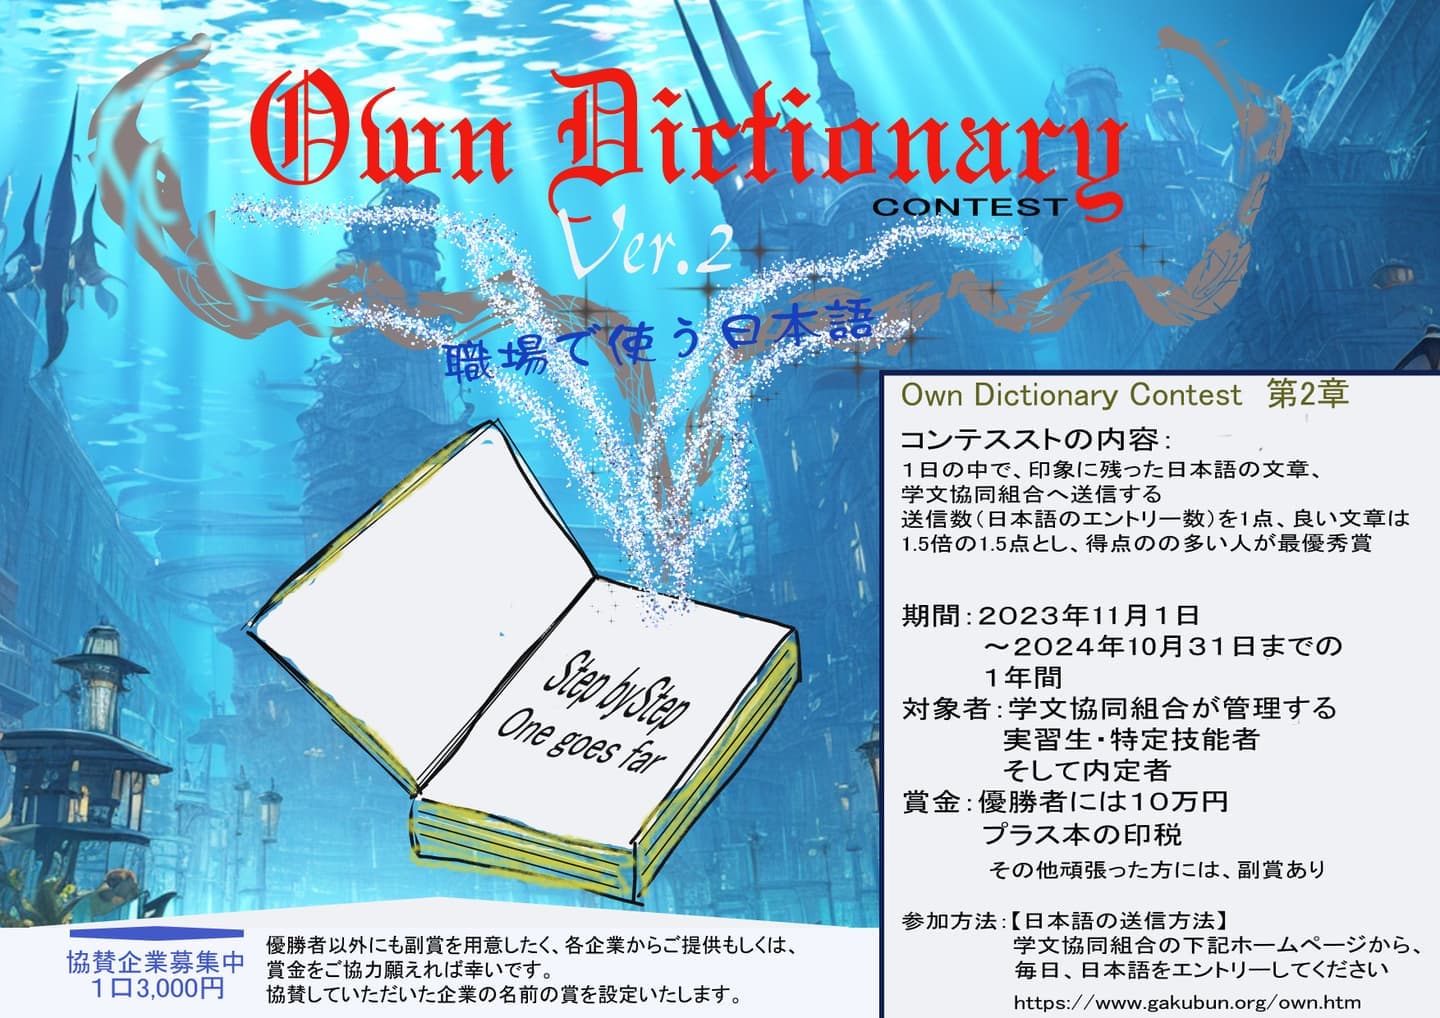 owndictionary